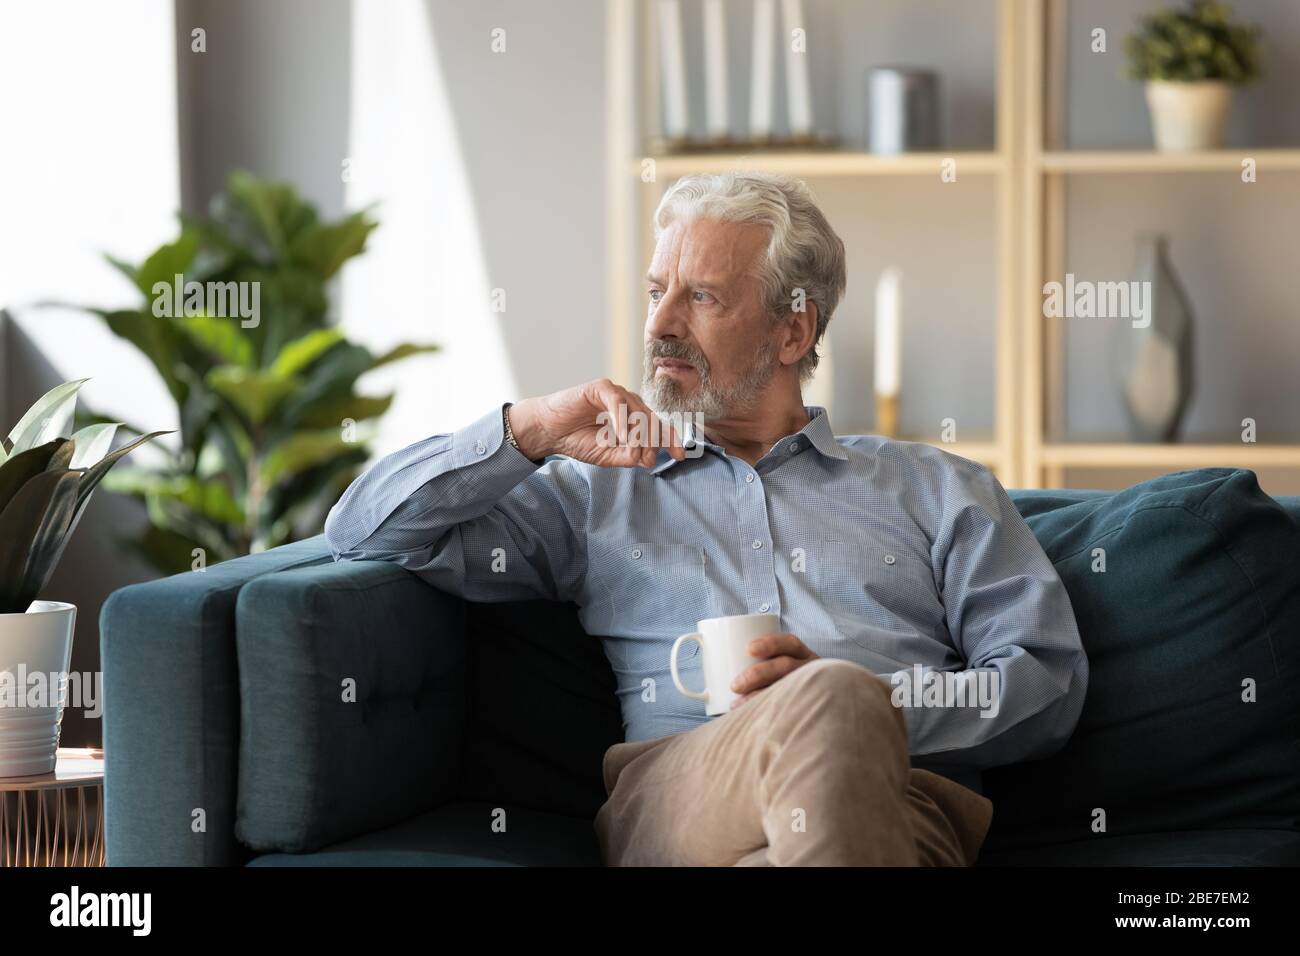 Thoughtful older man sitting on couch alone, feeling lonely Stock Photo